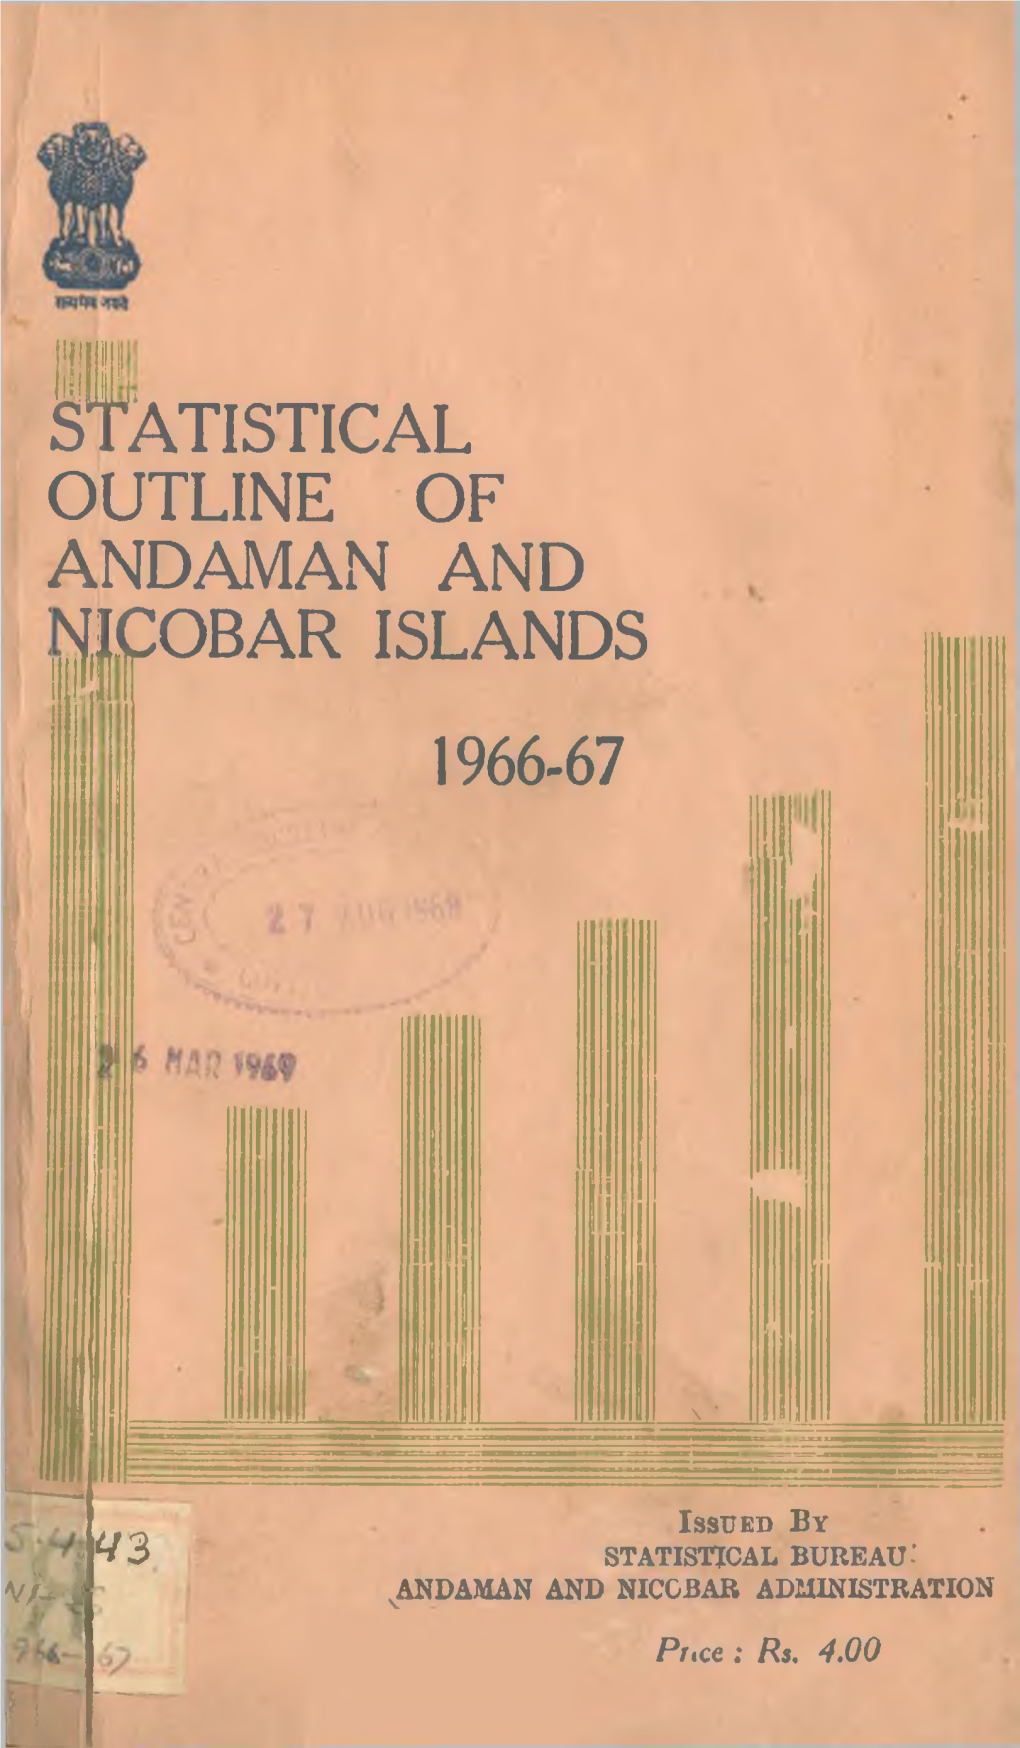 M Statistical Outline of Andaman and :^|Cobar Islands 1966-67